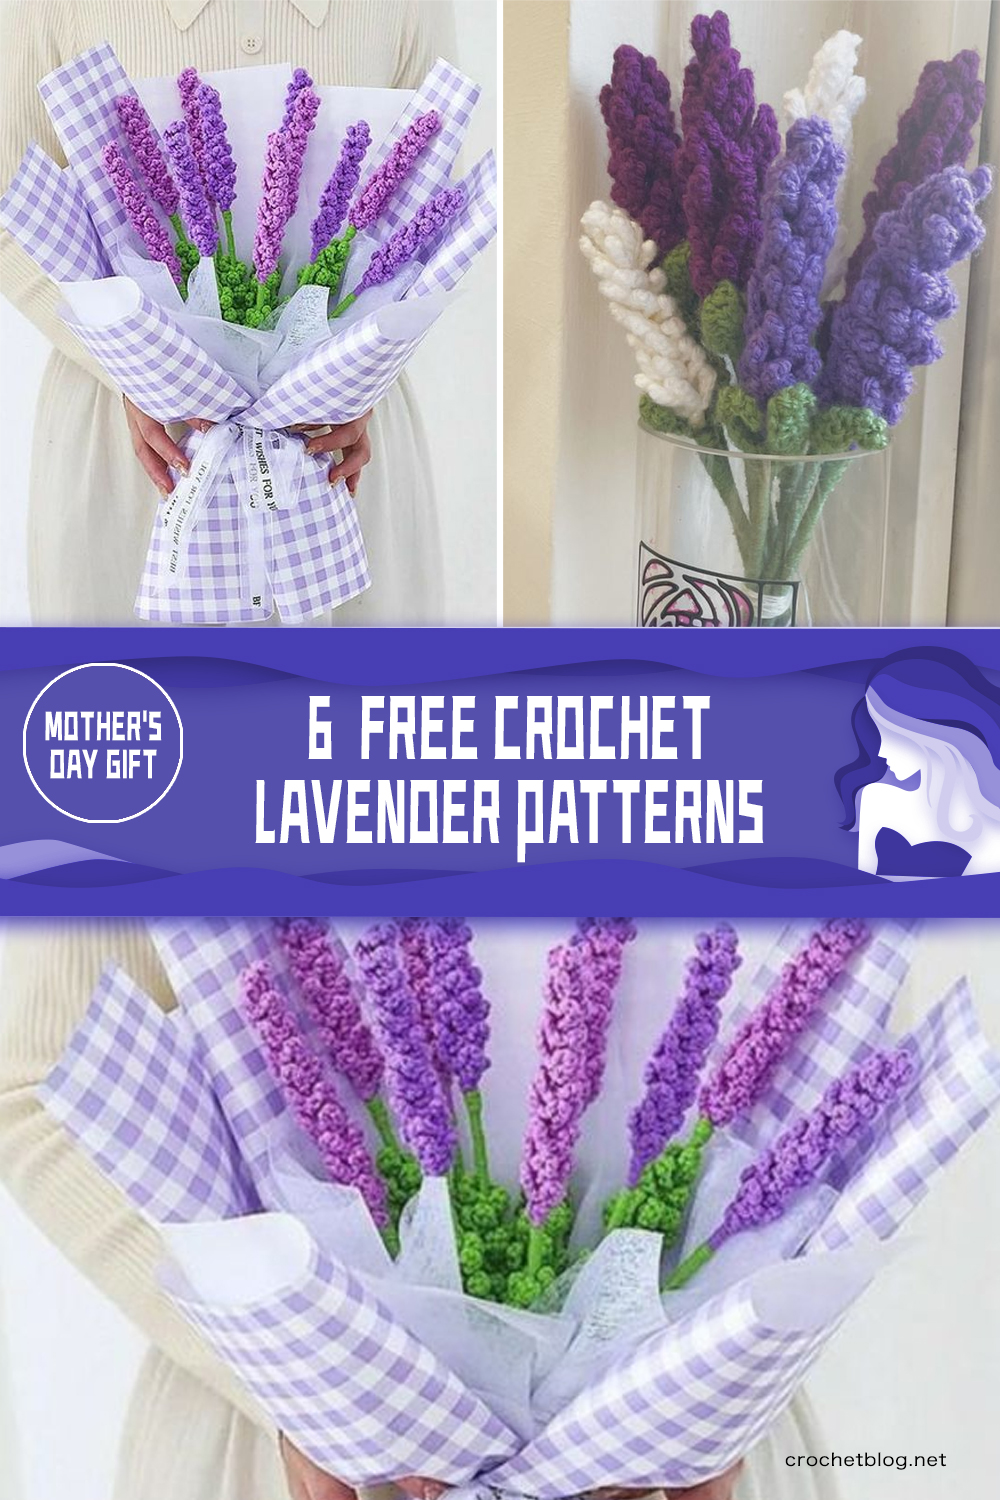 Mother's Day Gift - 6 FREE Crochet Lavender Patterns